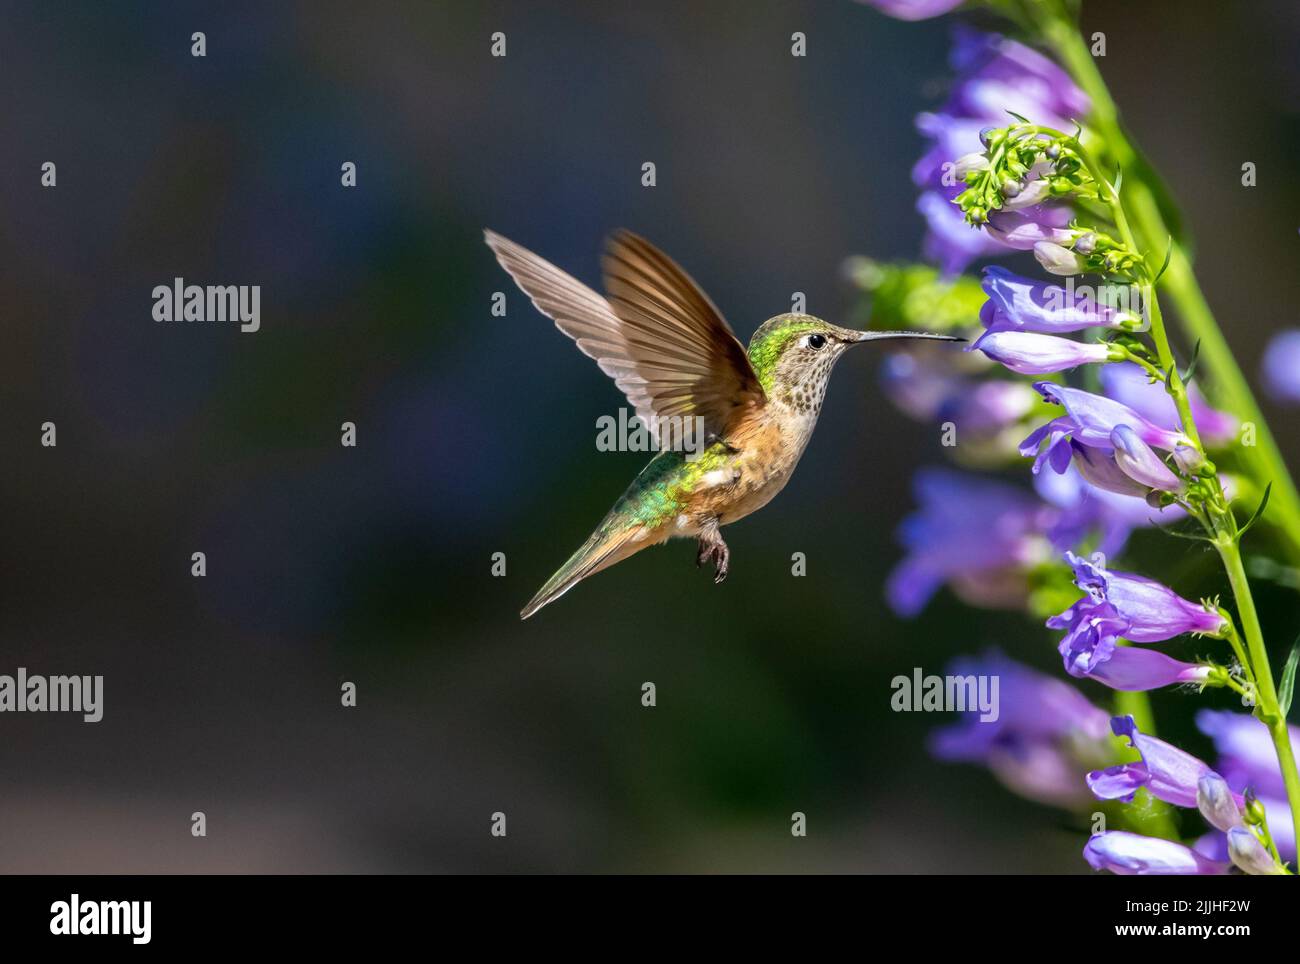 A female Broad-tailed Hummingbird approaching a Rocky Mountain Penstemon flower stalk with upright wings against a dark background. Stock Photo